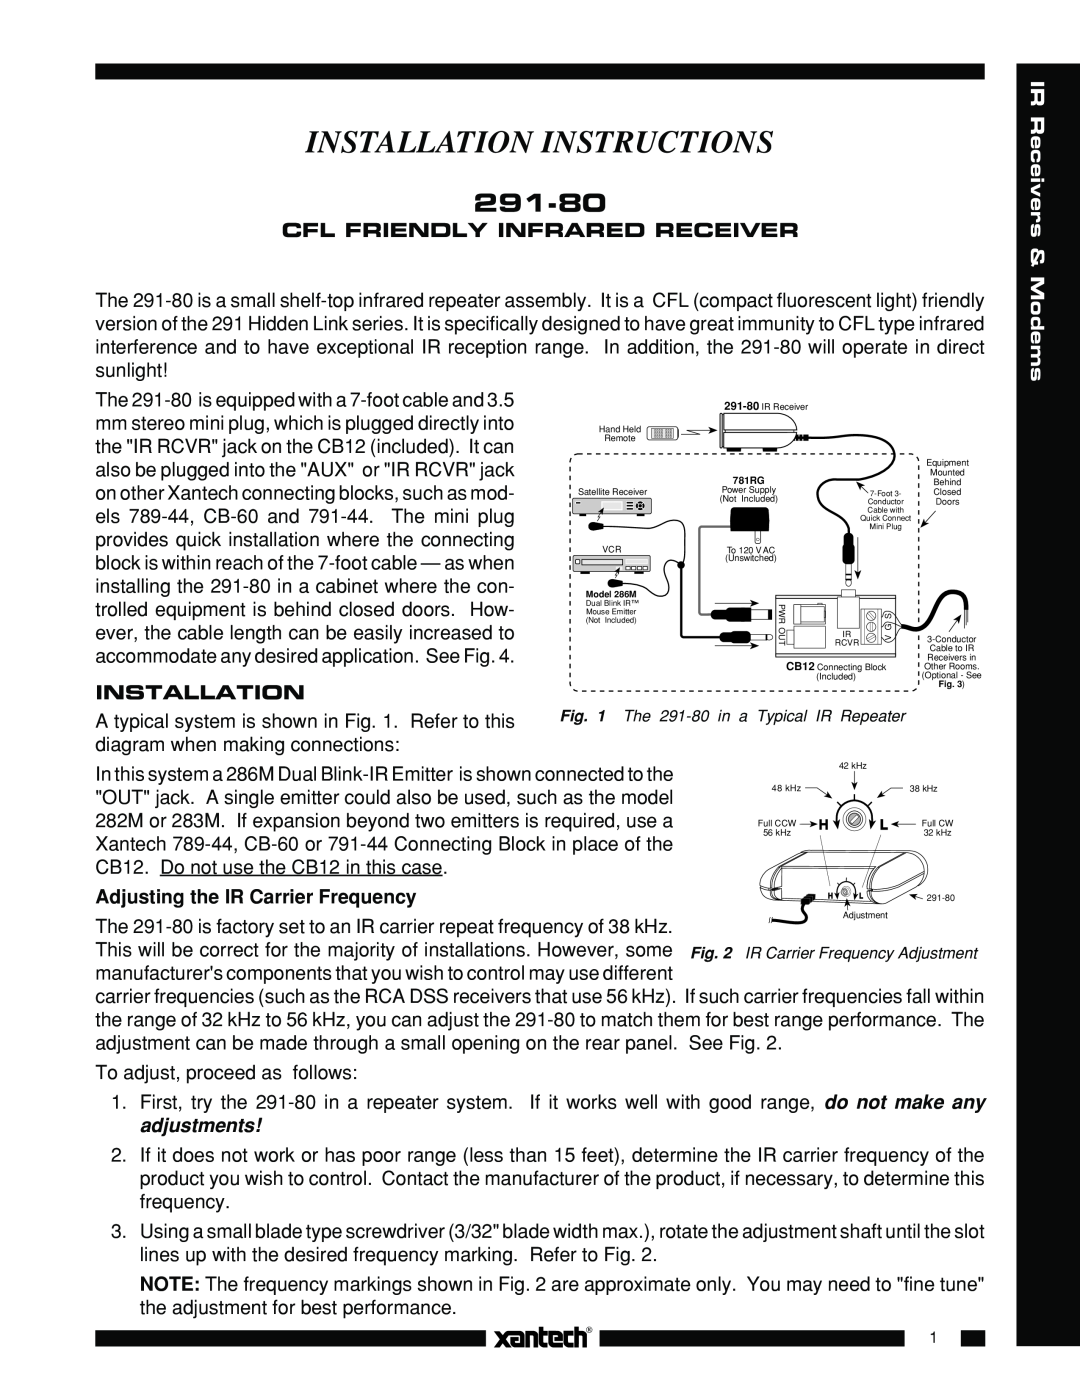 Xantech 291-80 installation instructions Cfl Friendly Infrared Receiver, Installation, Adjusting the IR Carrier Frequency 